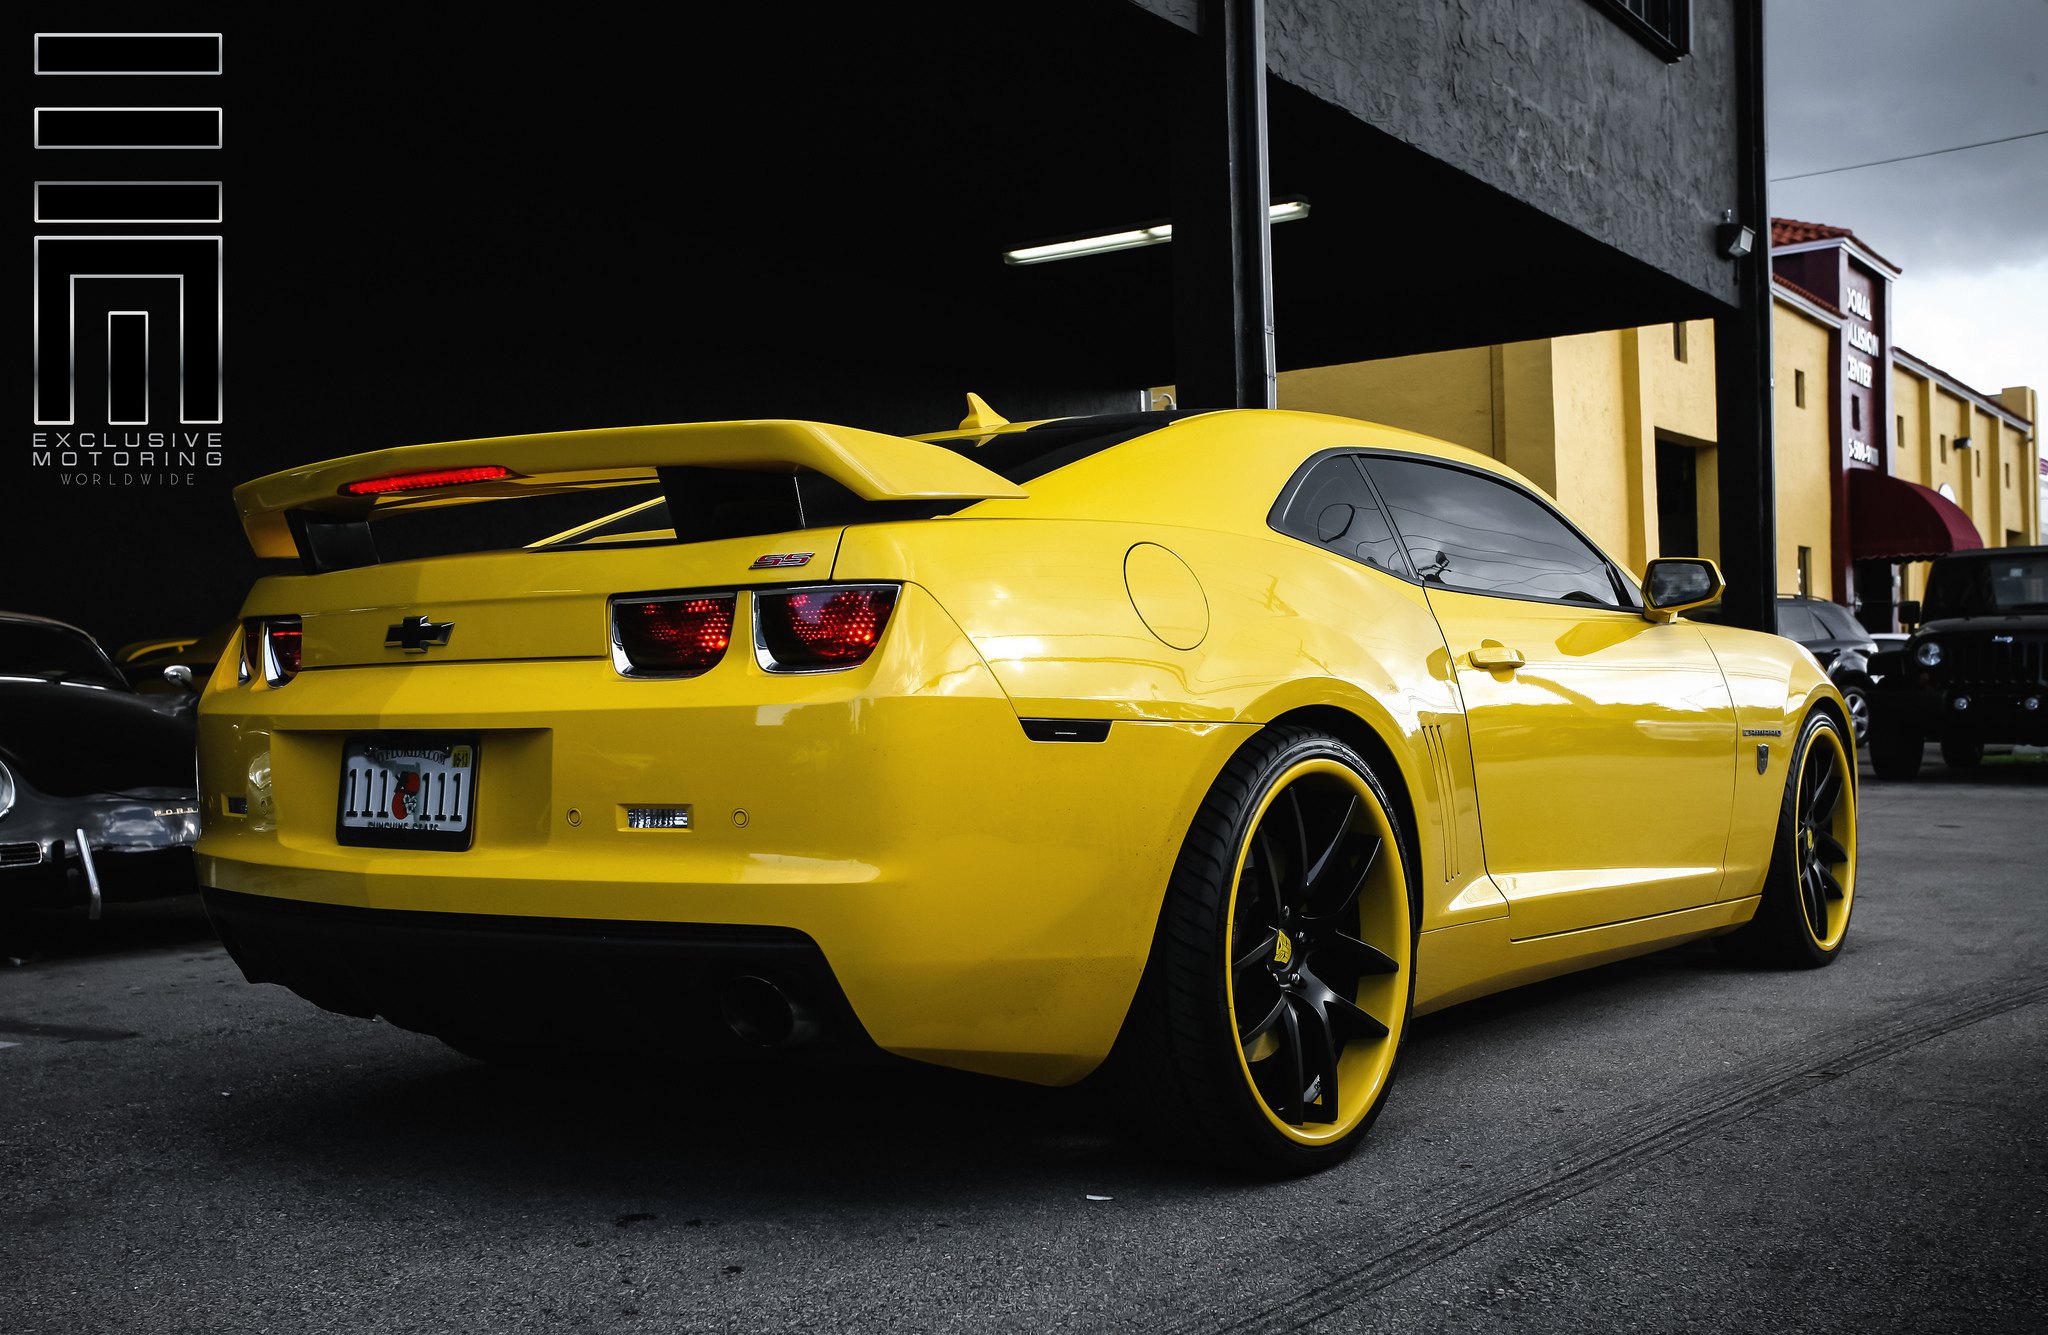 Bumblebee Chevy Camaro SS Tail Lights - Photo by Exclusive Motoring